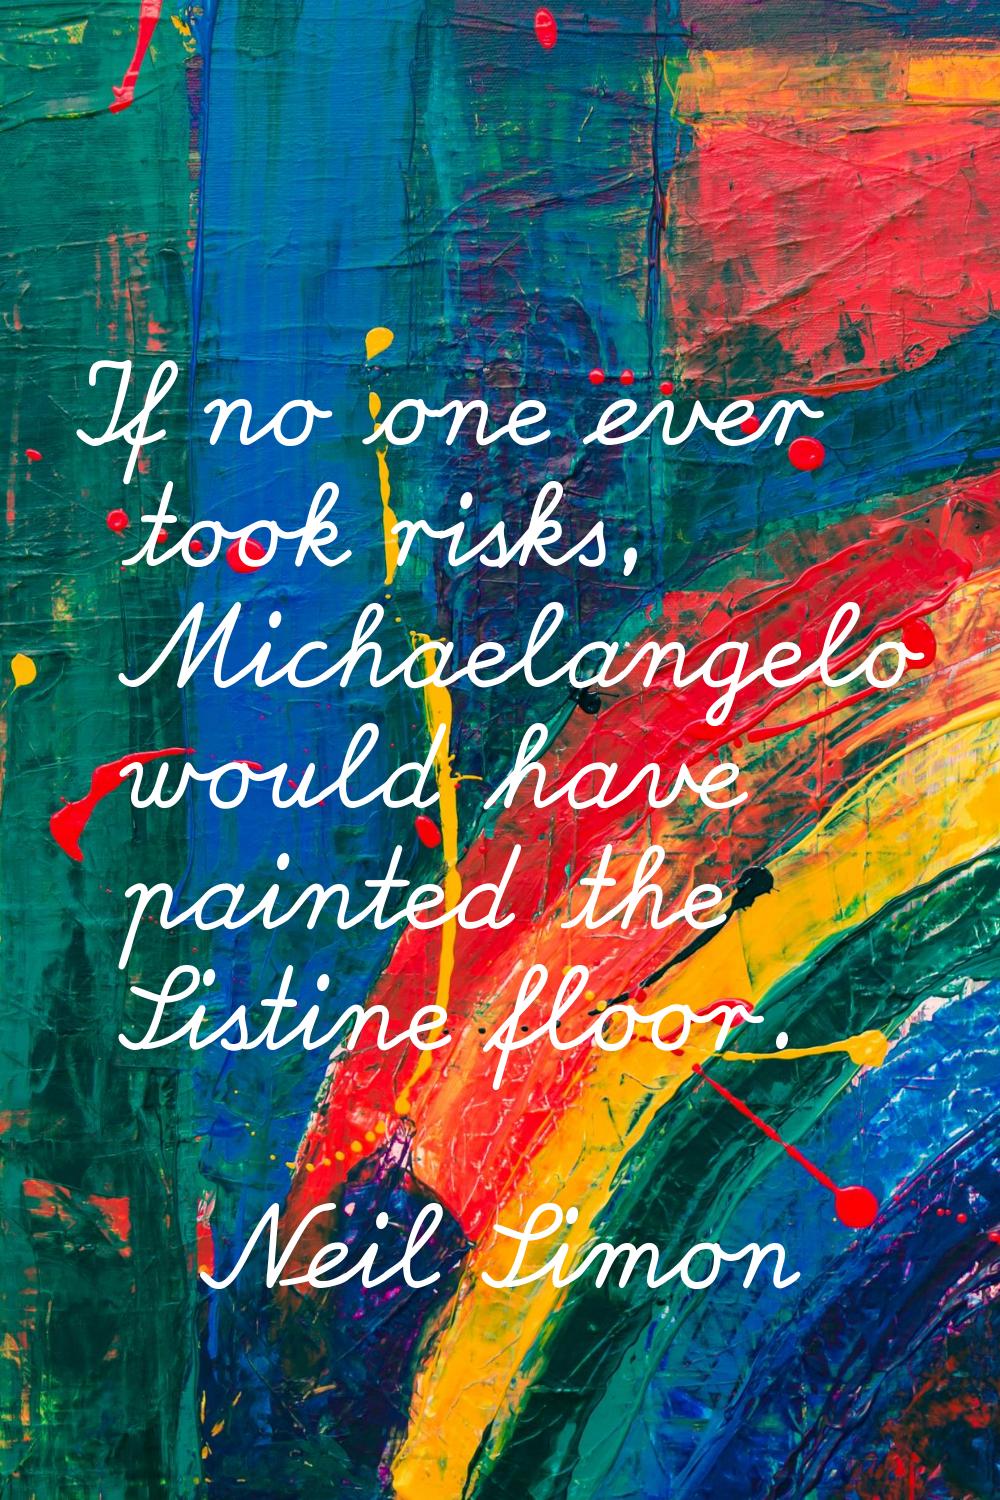 If no one ever took risks, Michaelangelo would have painted the Sistine floor.